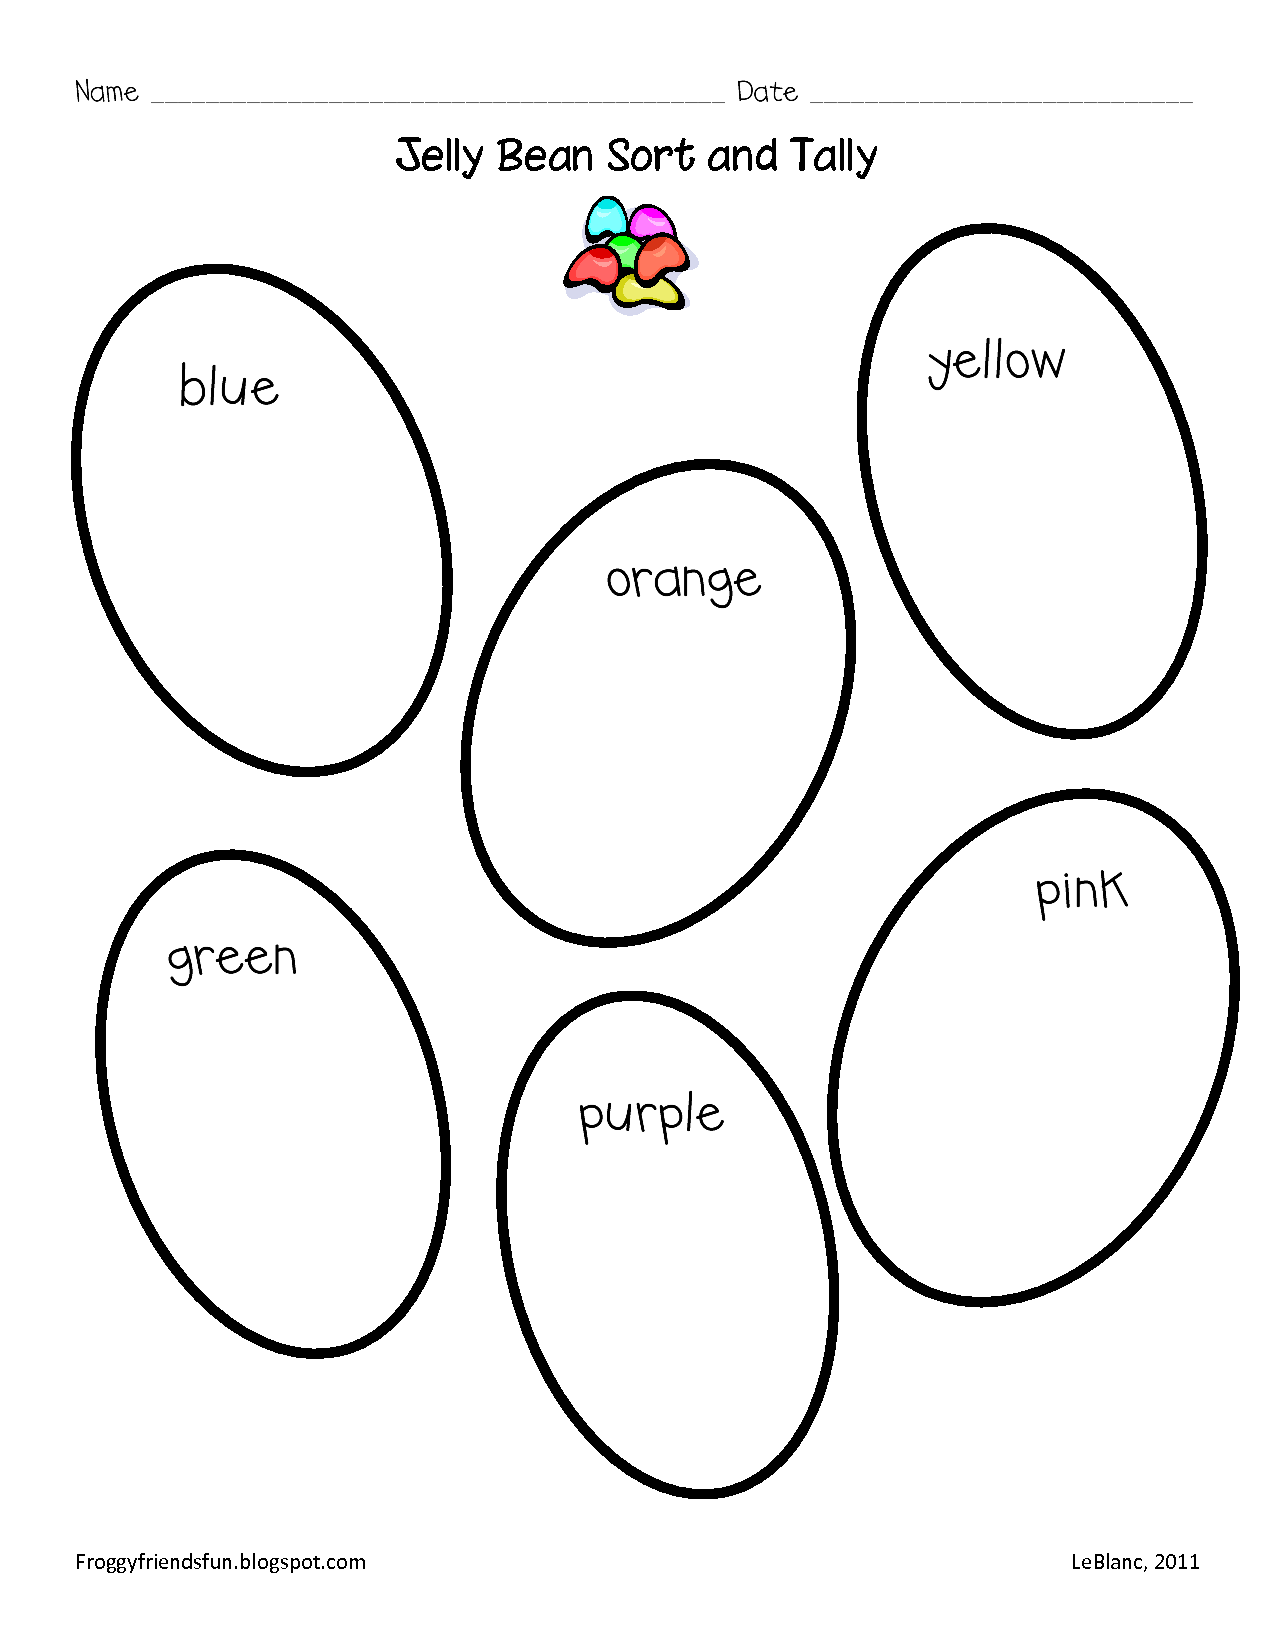 jelly bean coloring page printable coloring page bean page coloring jelly printable 